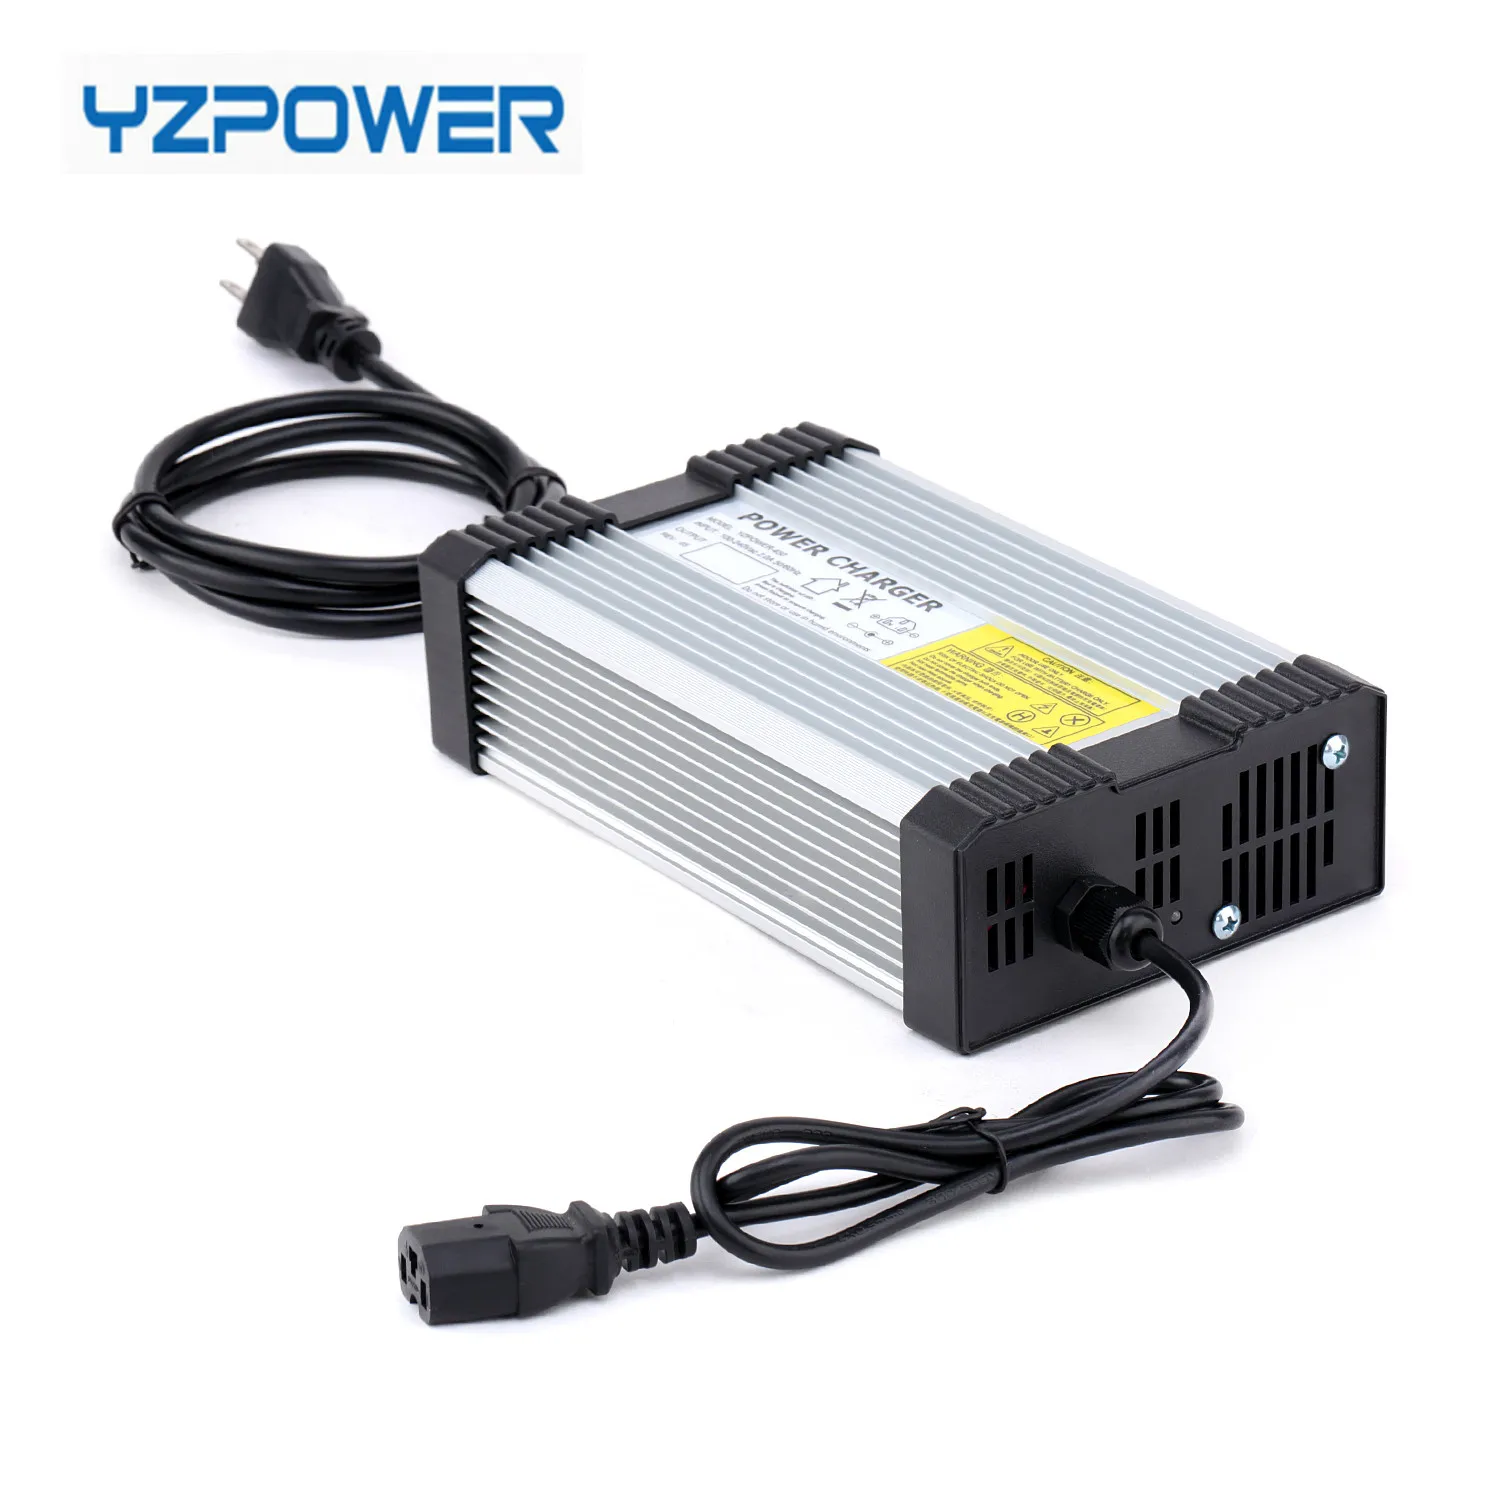 

YZPOWER 67.2V 5A Lithium Battery Charger 16s 67.2V5A Li-Ion Ion For 60V 60 Volt 5A E-bike Tools Battery, Black battery charger